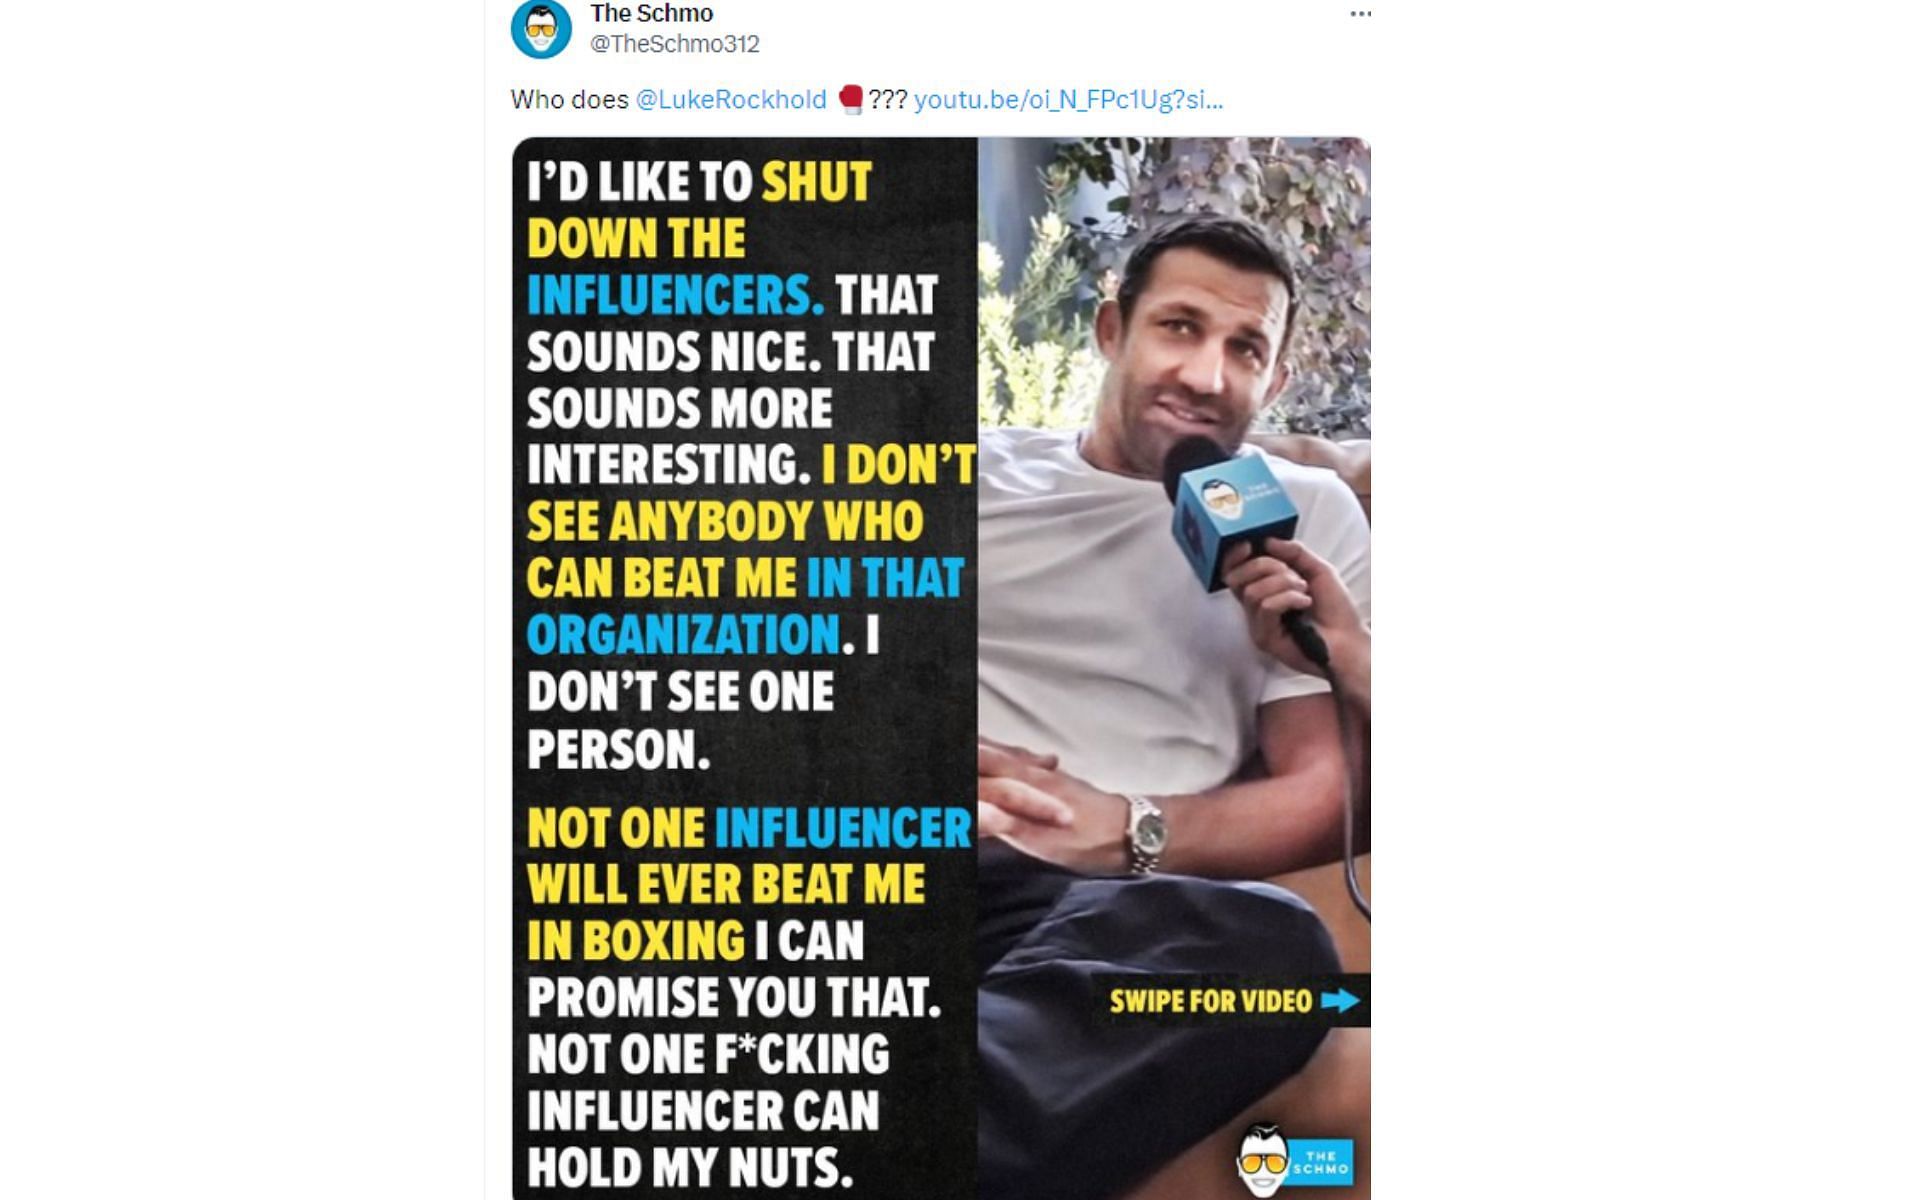 Tweet regarding intentions to compete in influencer boxing